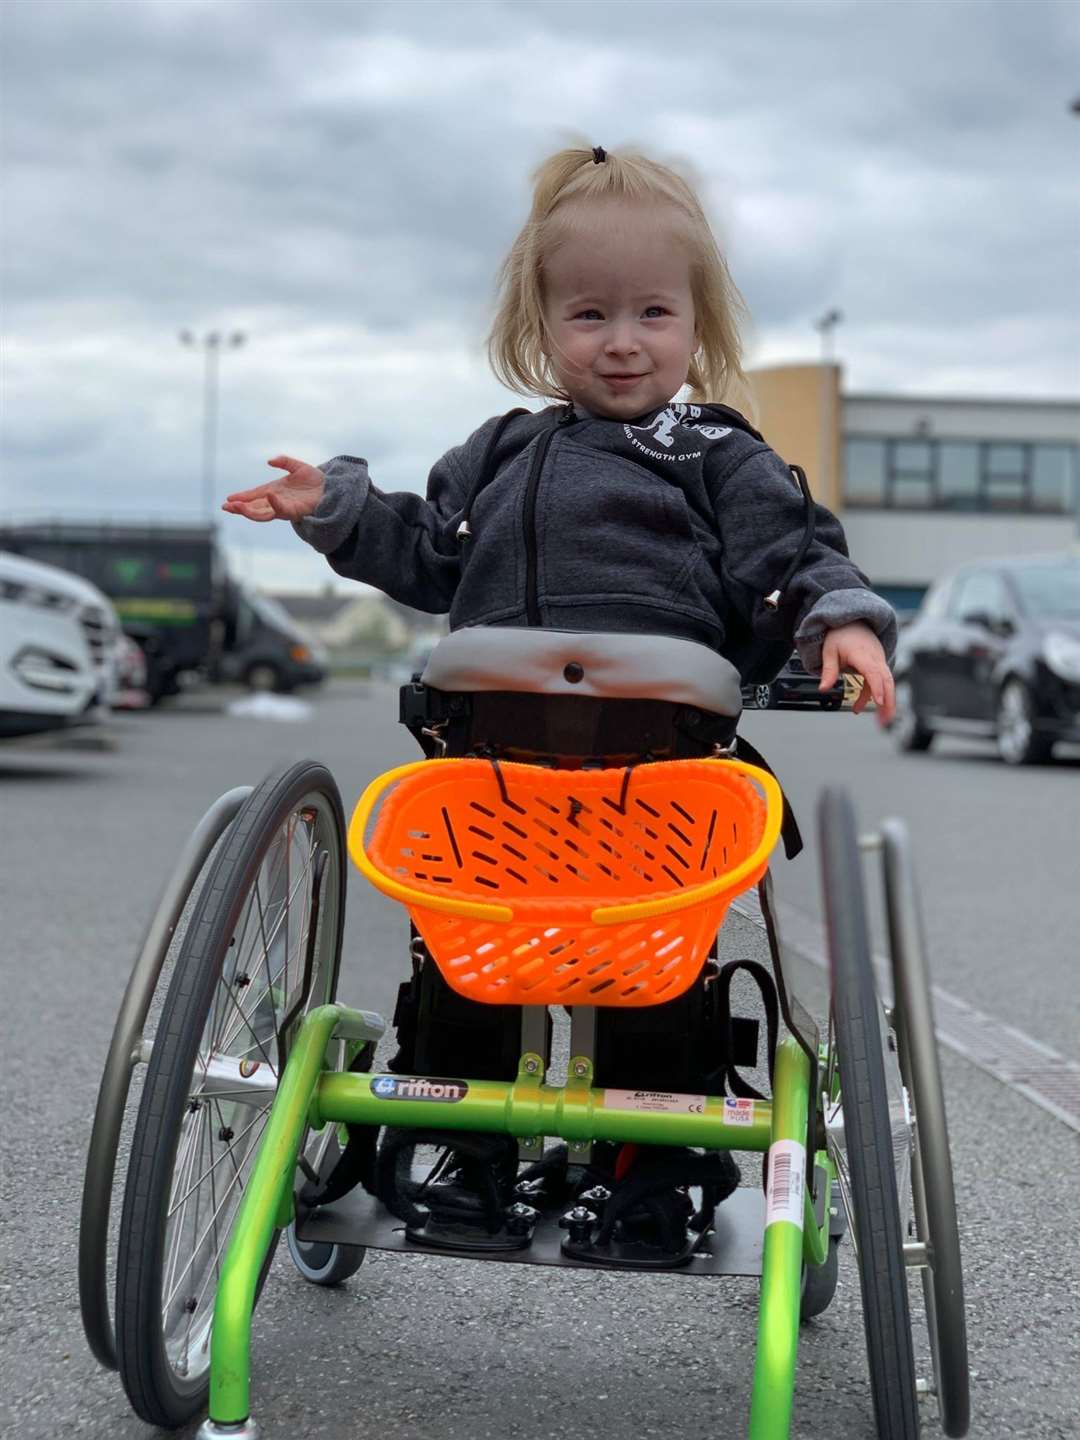 Willow's specialist wheelchair was inside the Land Rover when it was taken